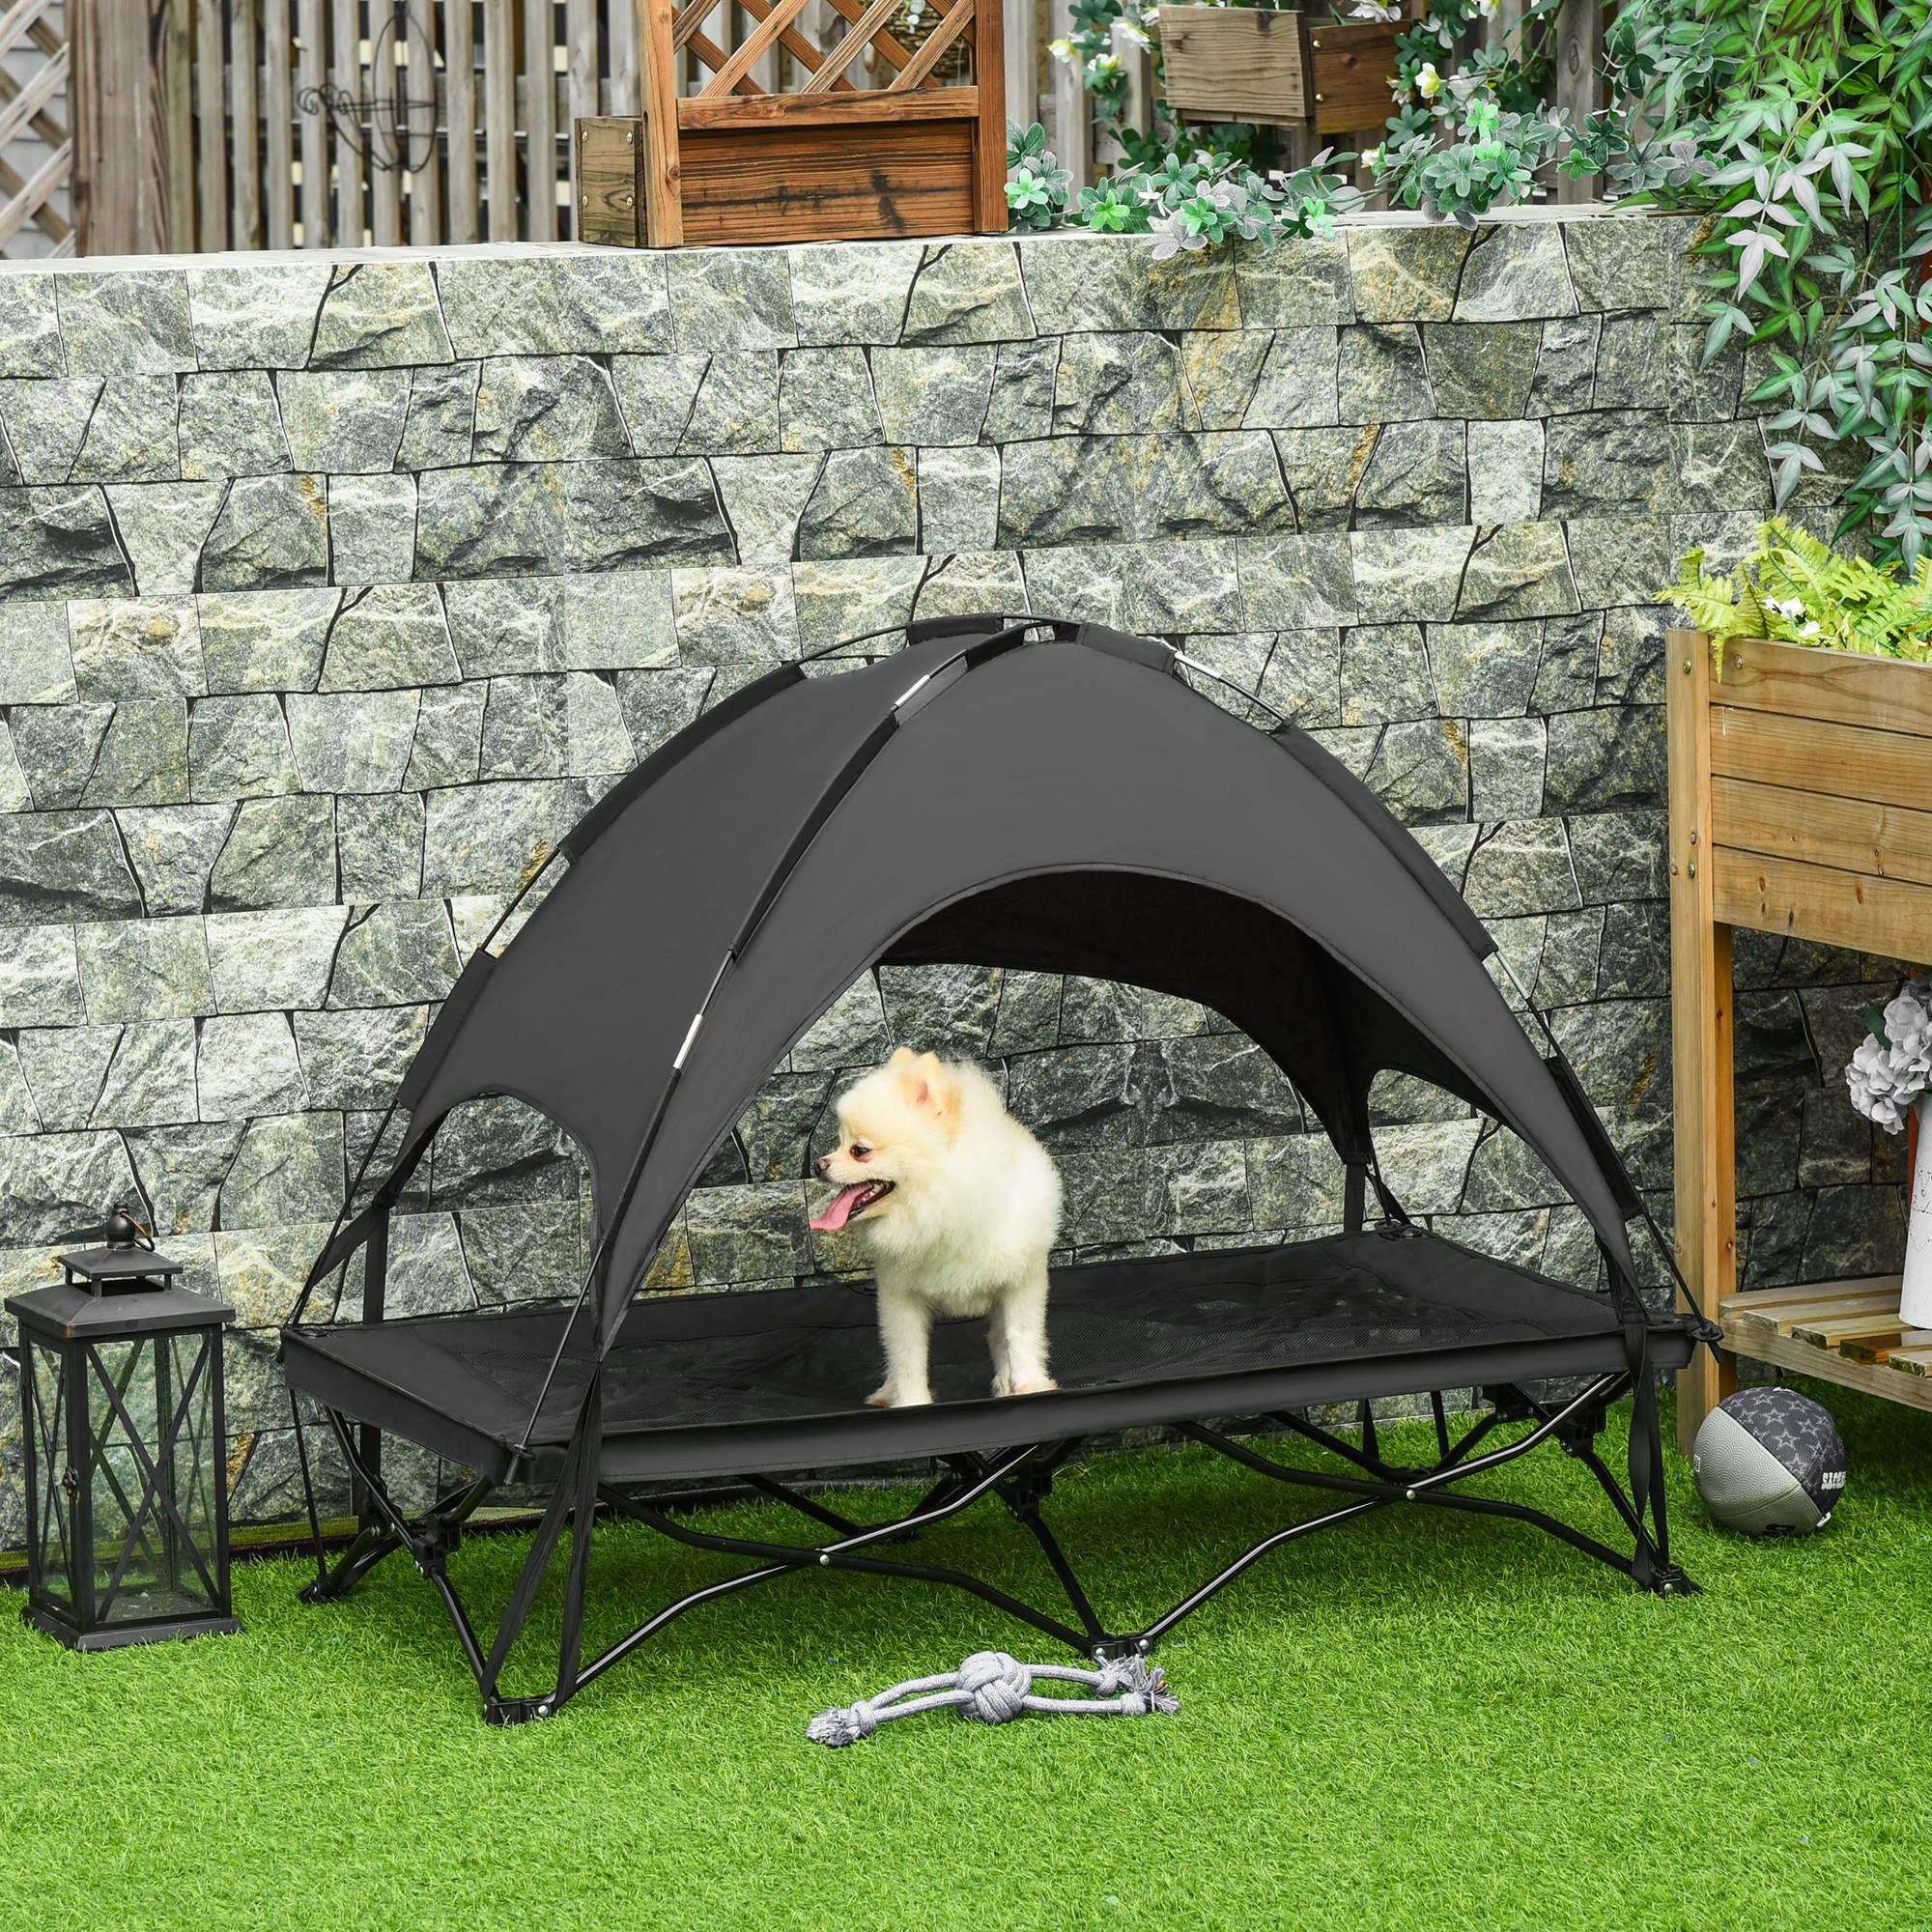 PawHut 46" Elevated Ventilated Cooling Pet Dog Bed w/ Canopy Shade Cover, Travel Bag, Black